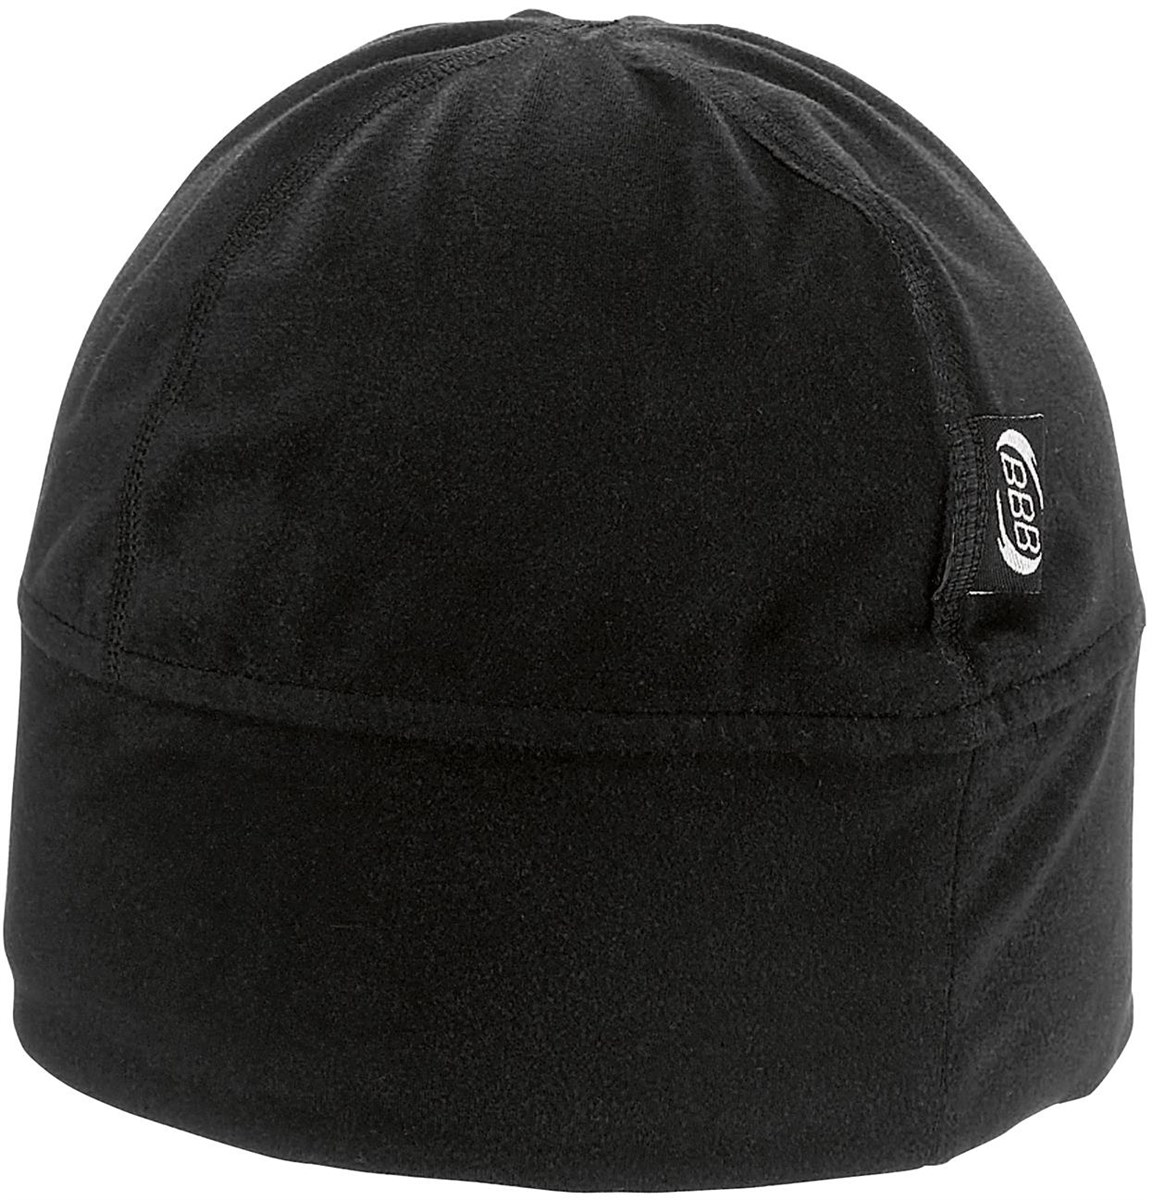 BBB BBW-96 - Winter Hat product image